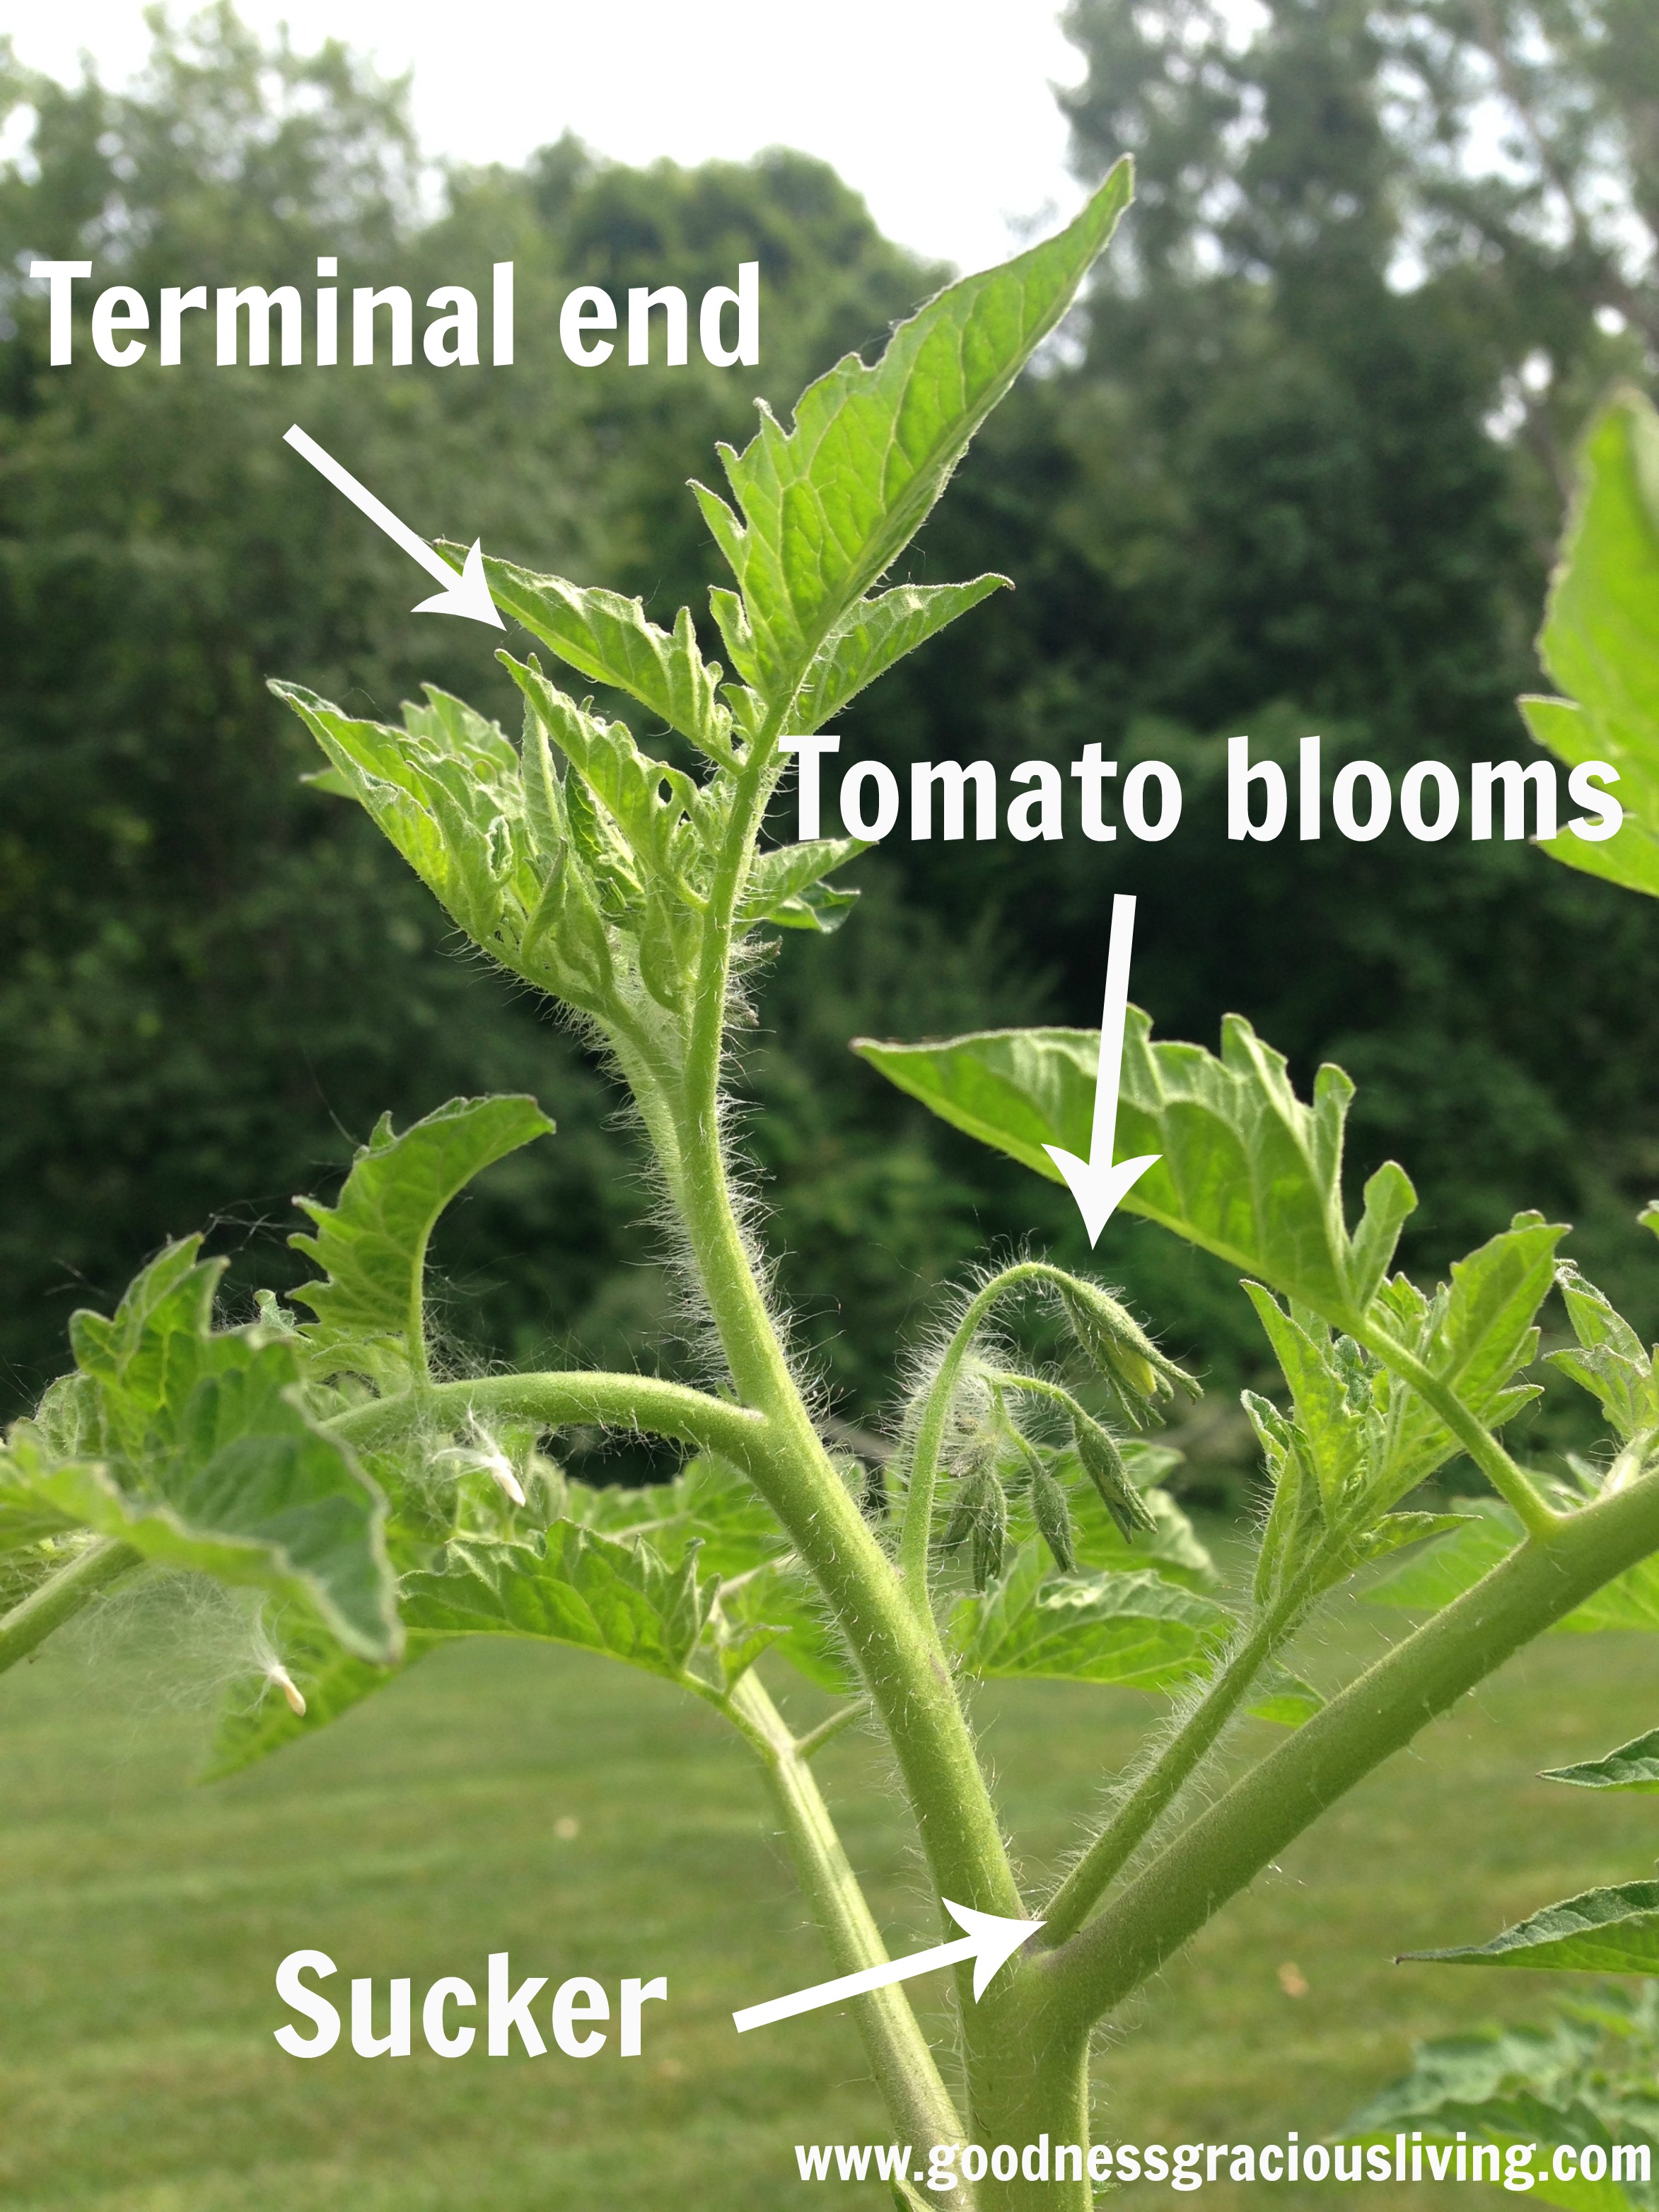 How To Grow Healthy Tomato Plants - Goodness Gracious Living Nutrition